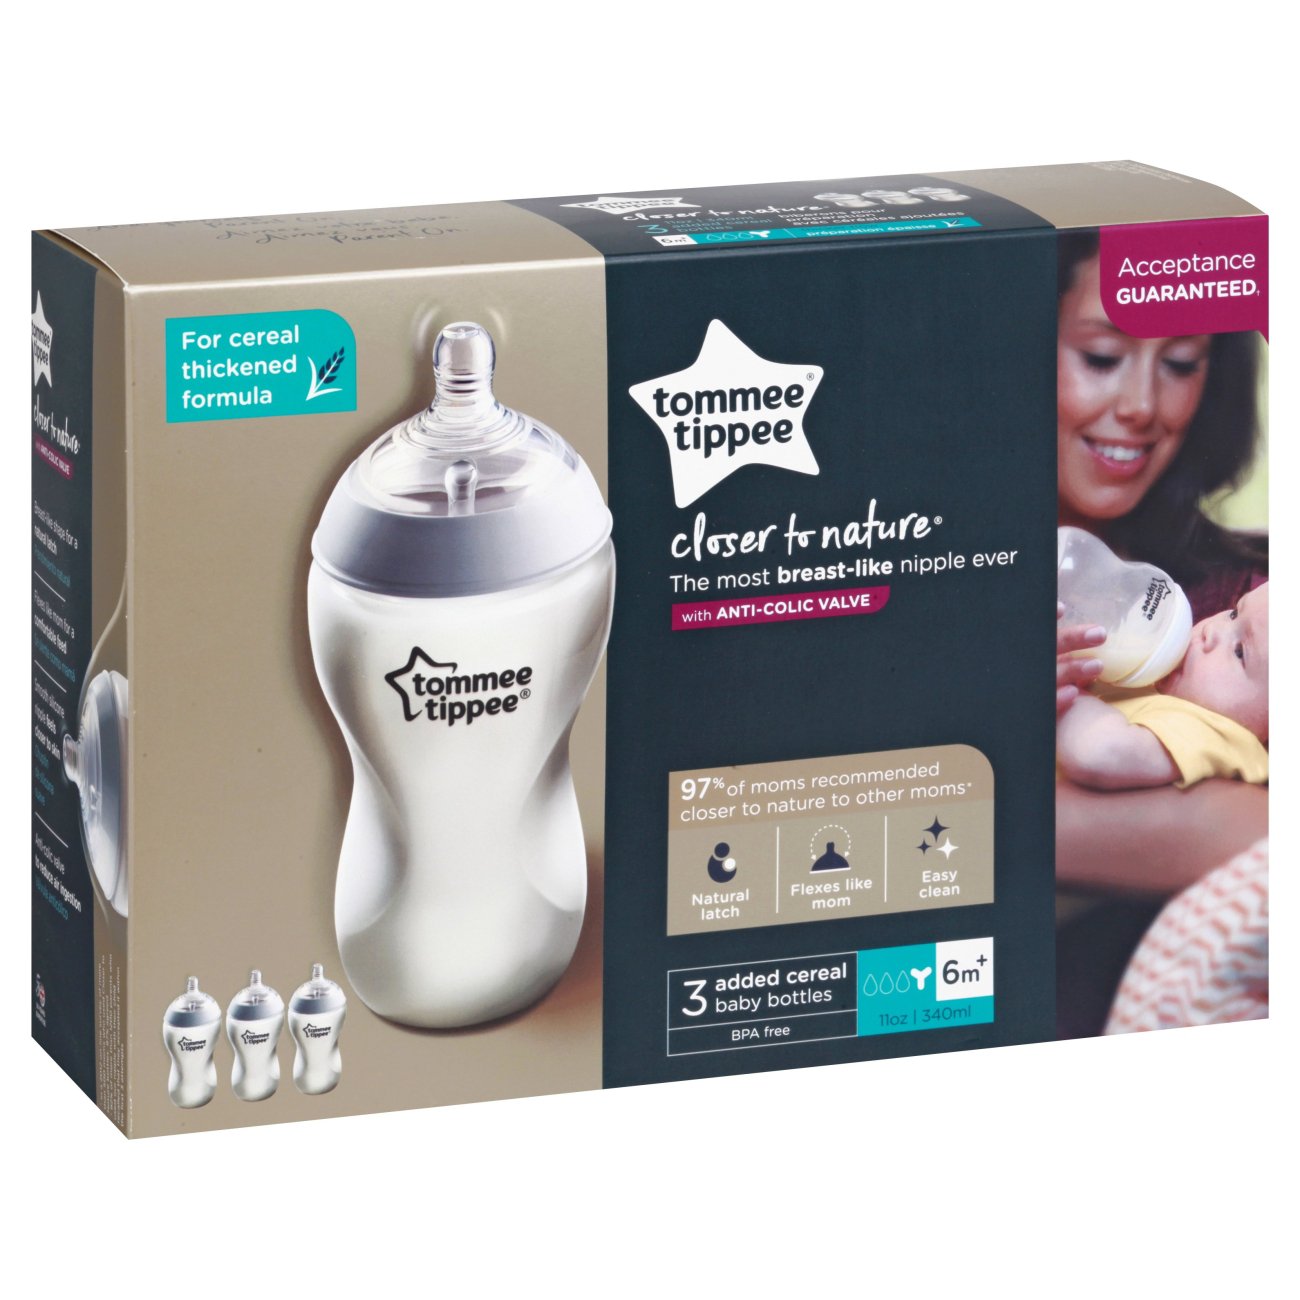 Tommee Tippee Closer to Nature, 11 oz Cereal Bottles